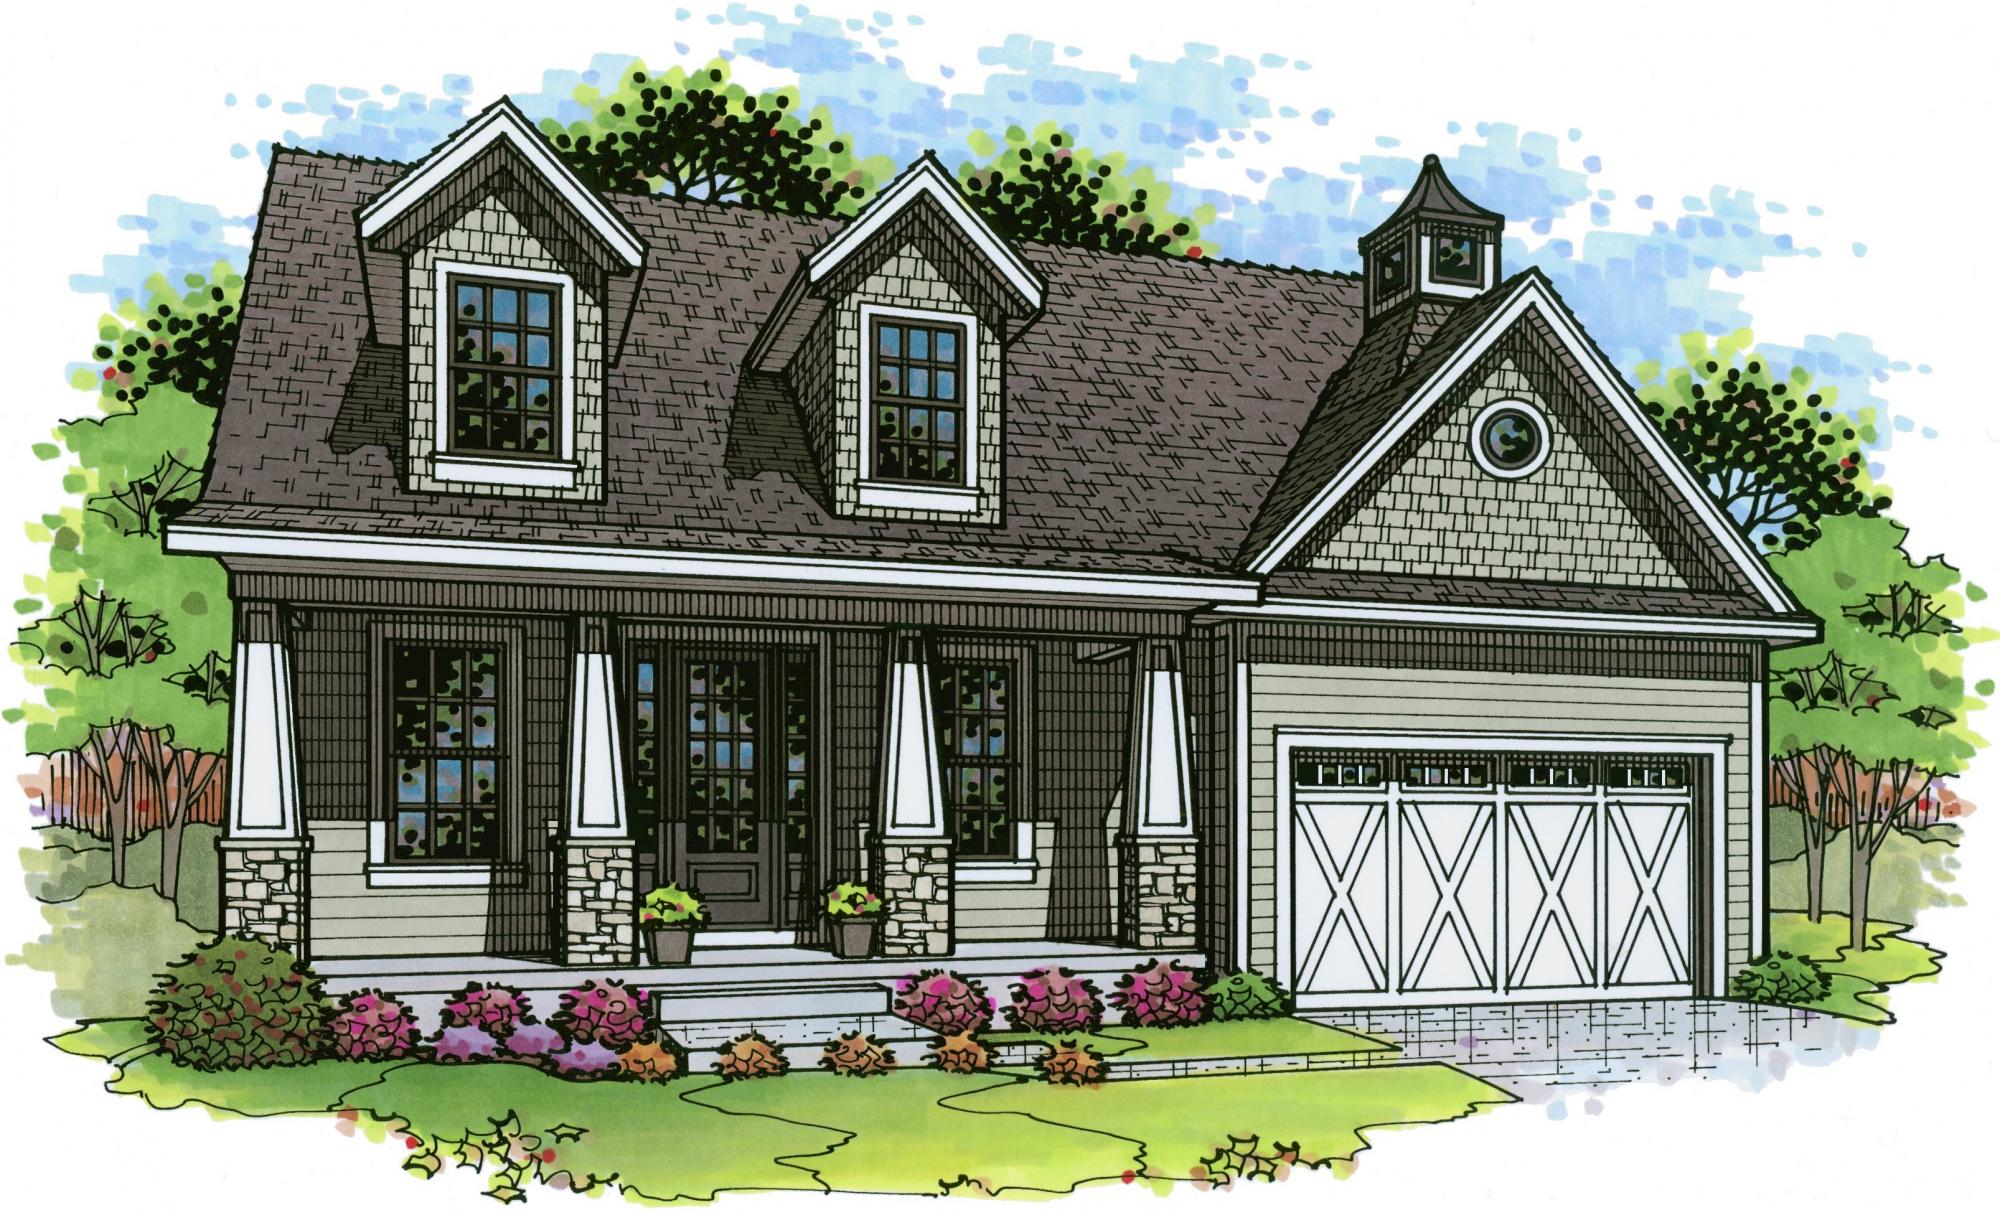 Color rendering of a magnolia model from lambie homes